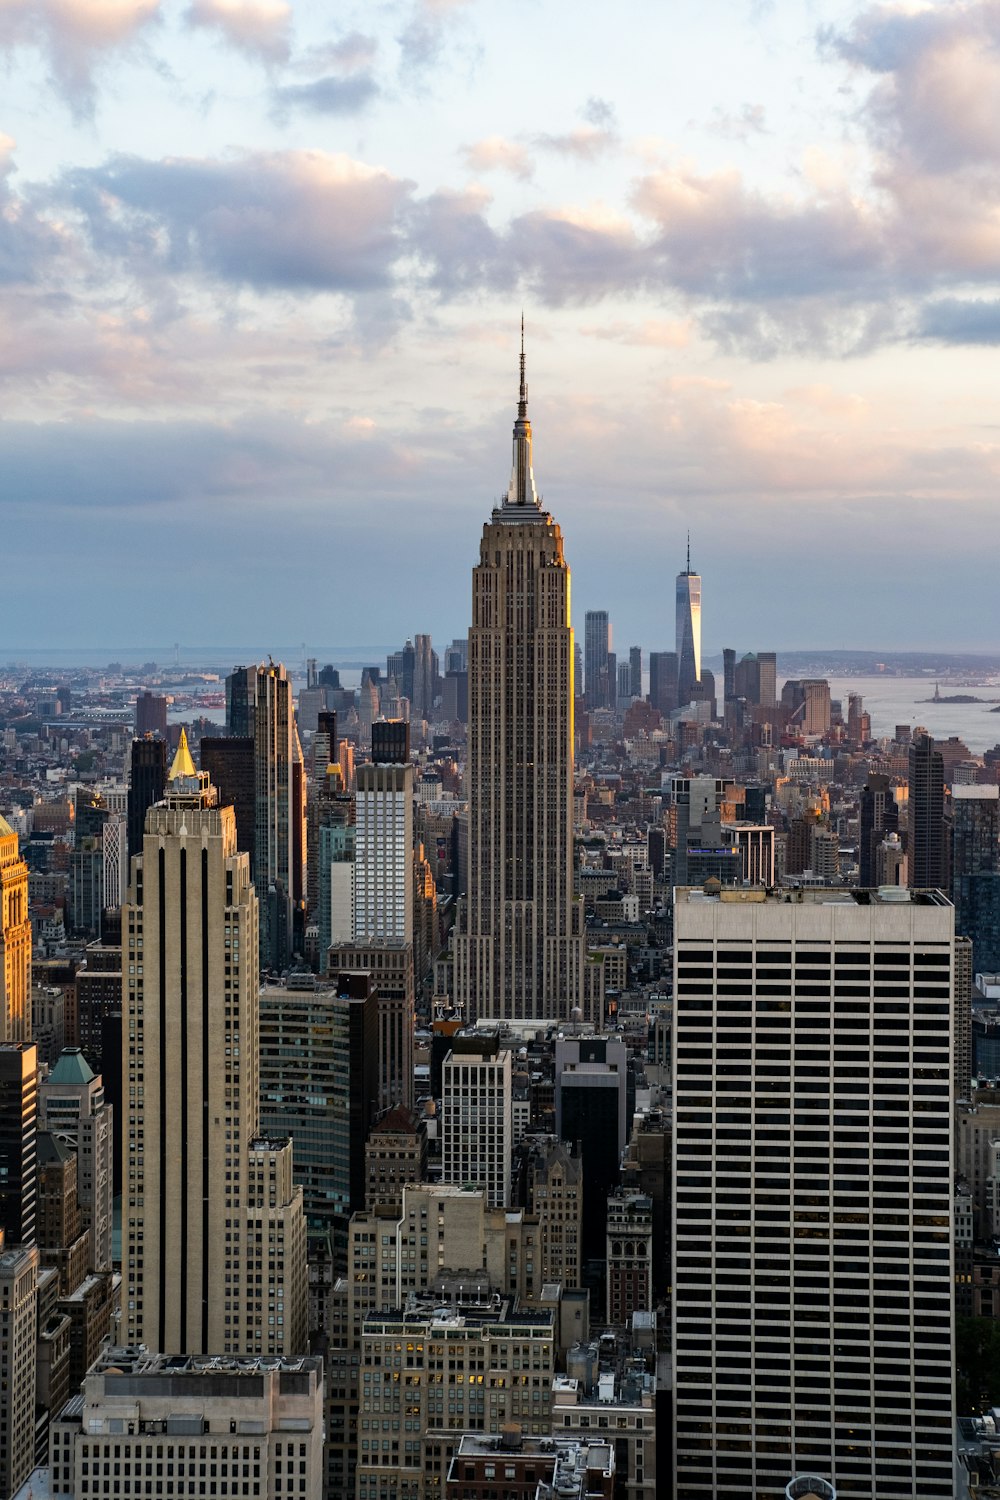 Empire State Building with tall buildings